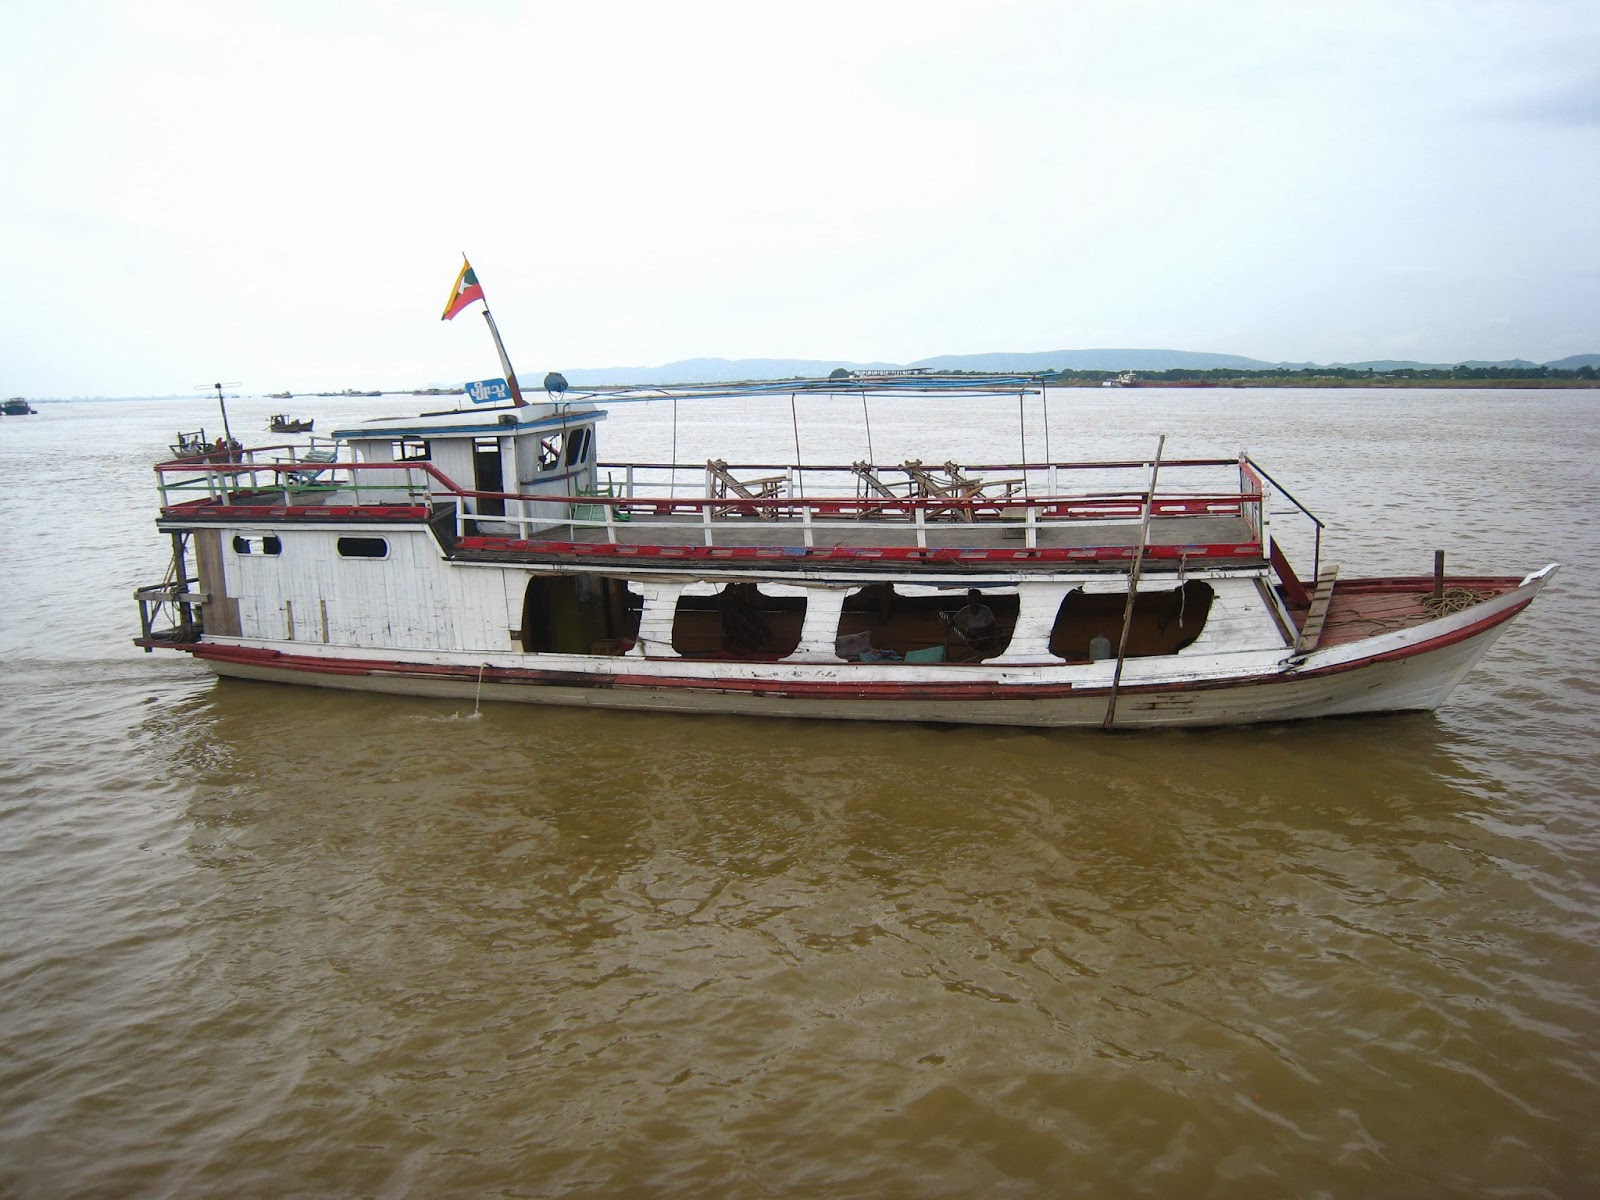 Travelling to Mandalay by river boat 